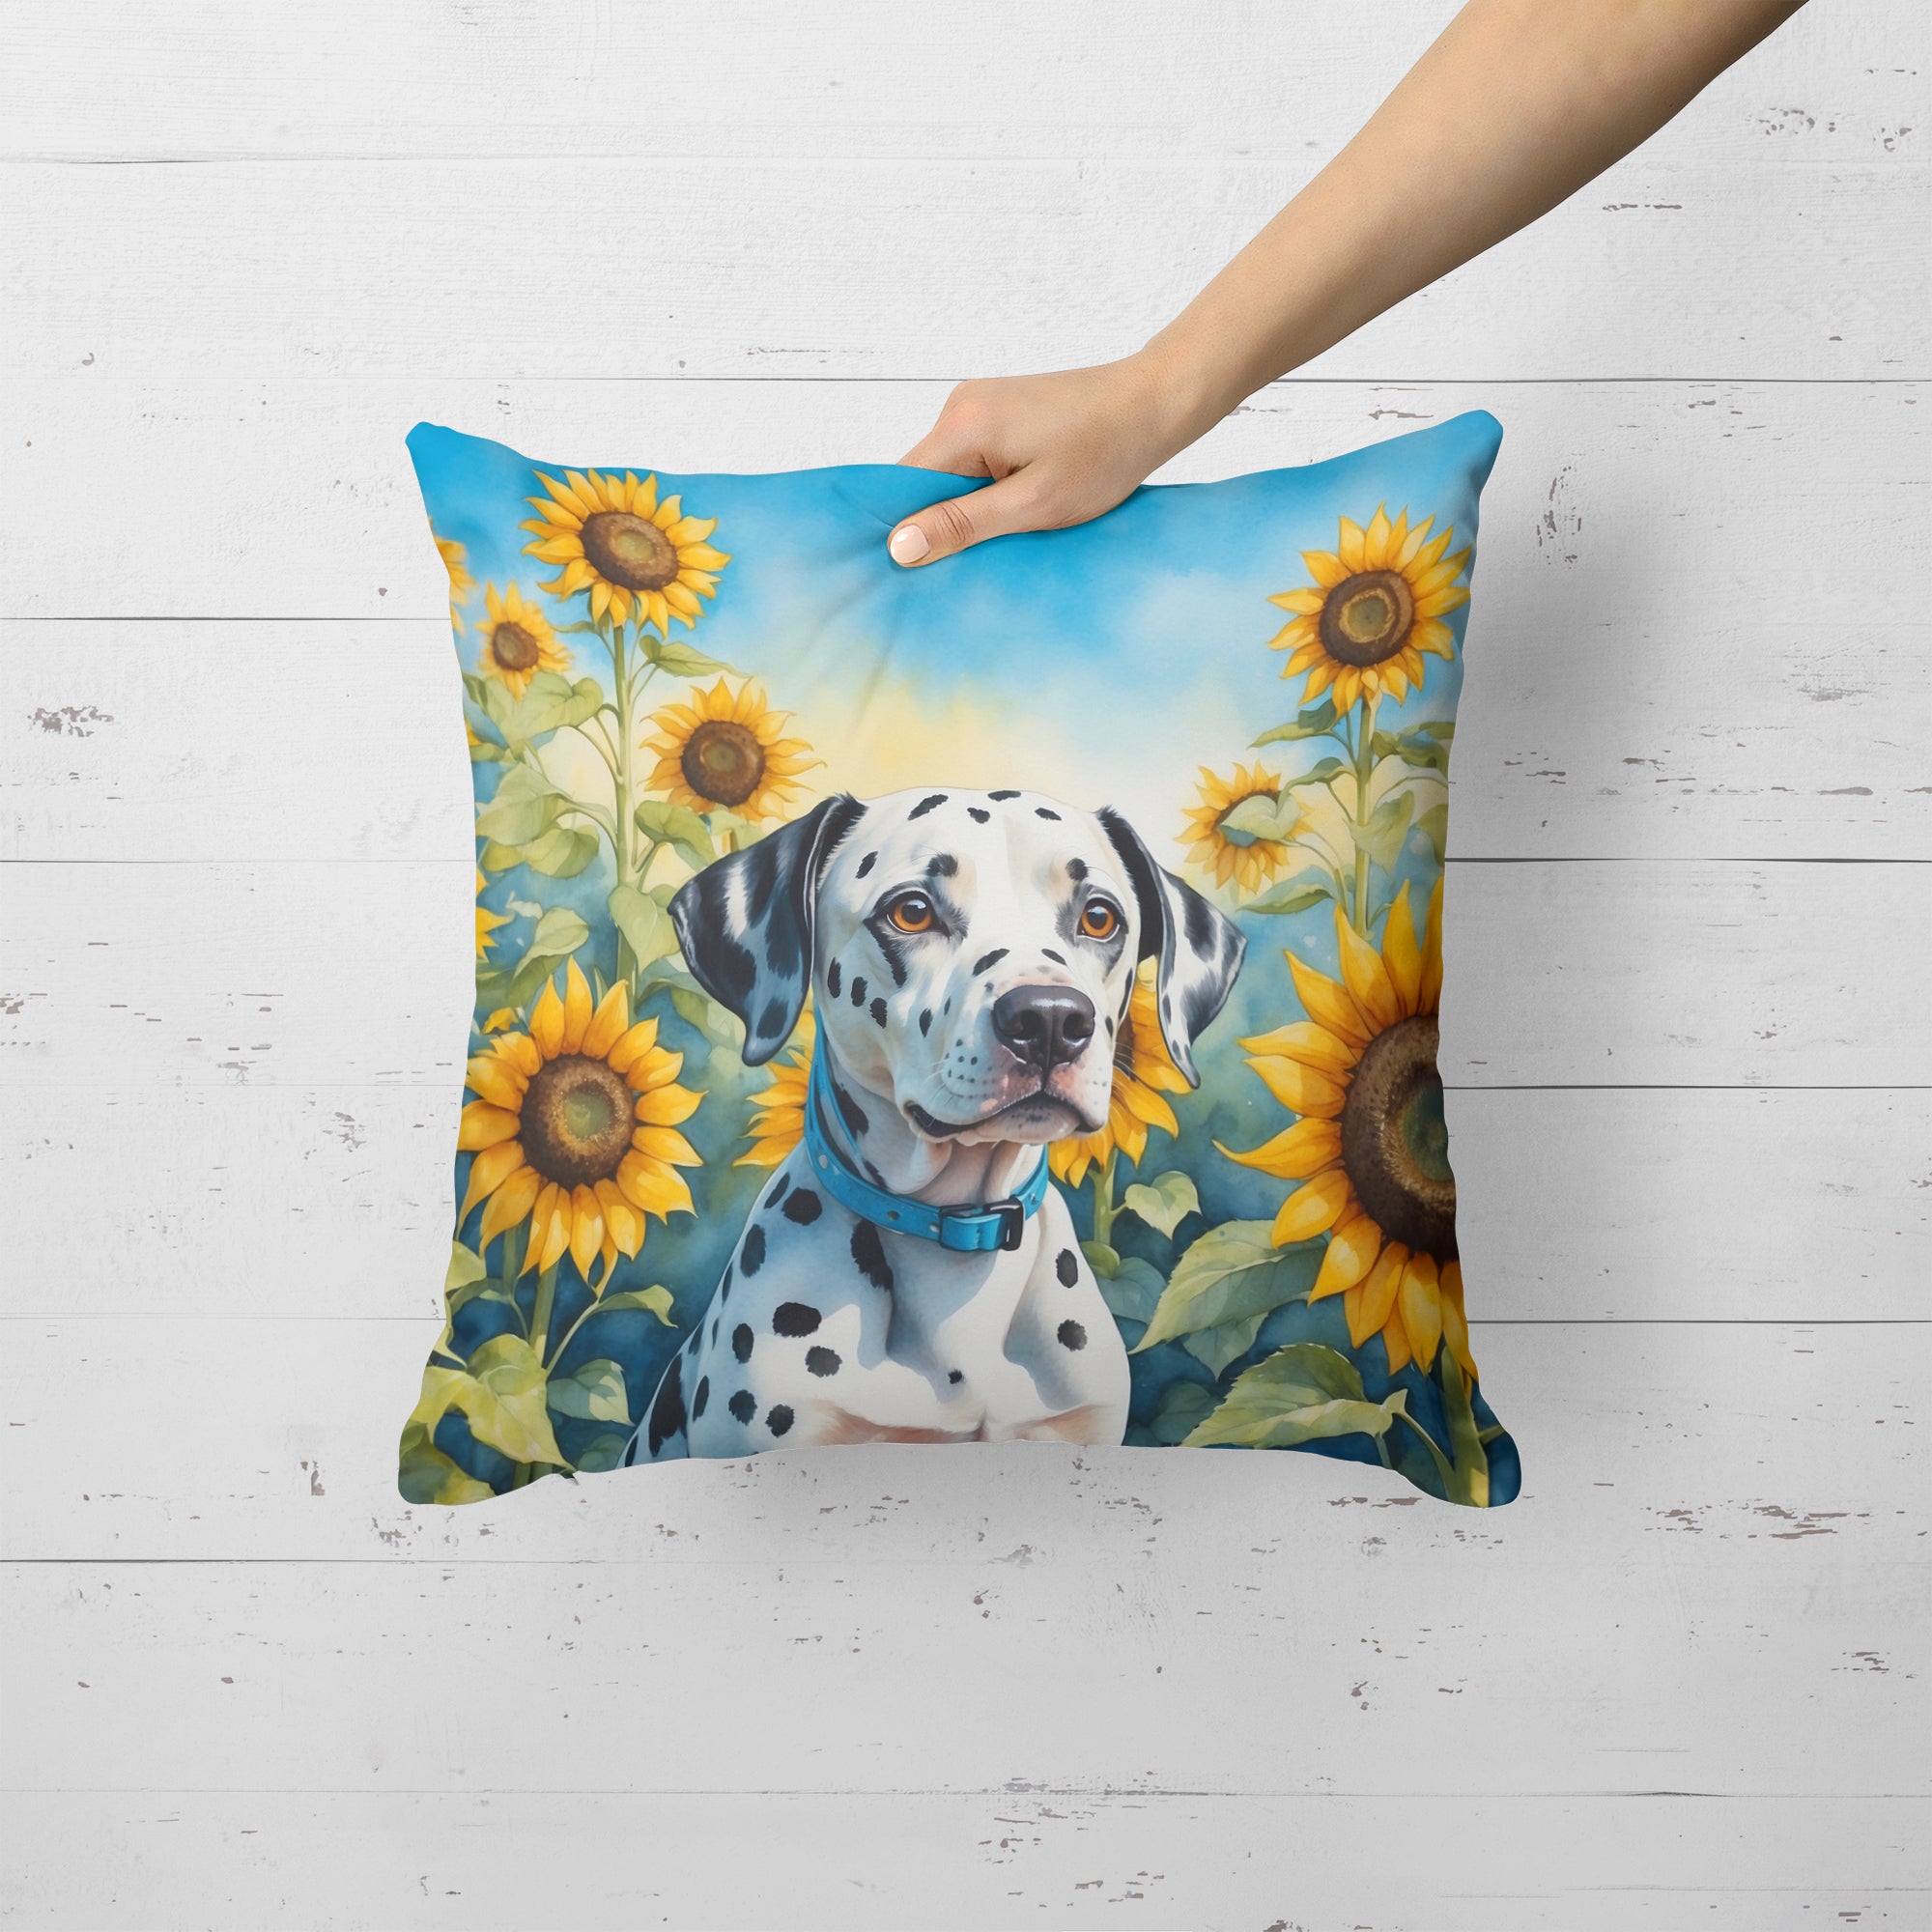 Buy this Dalmatian in Sunflowers Throw Pillow